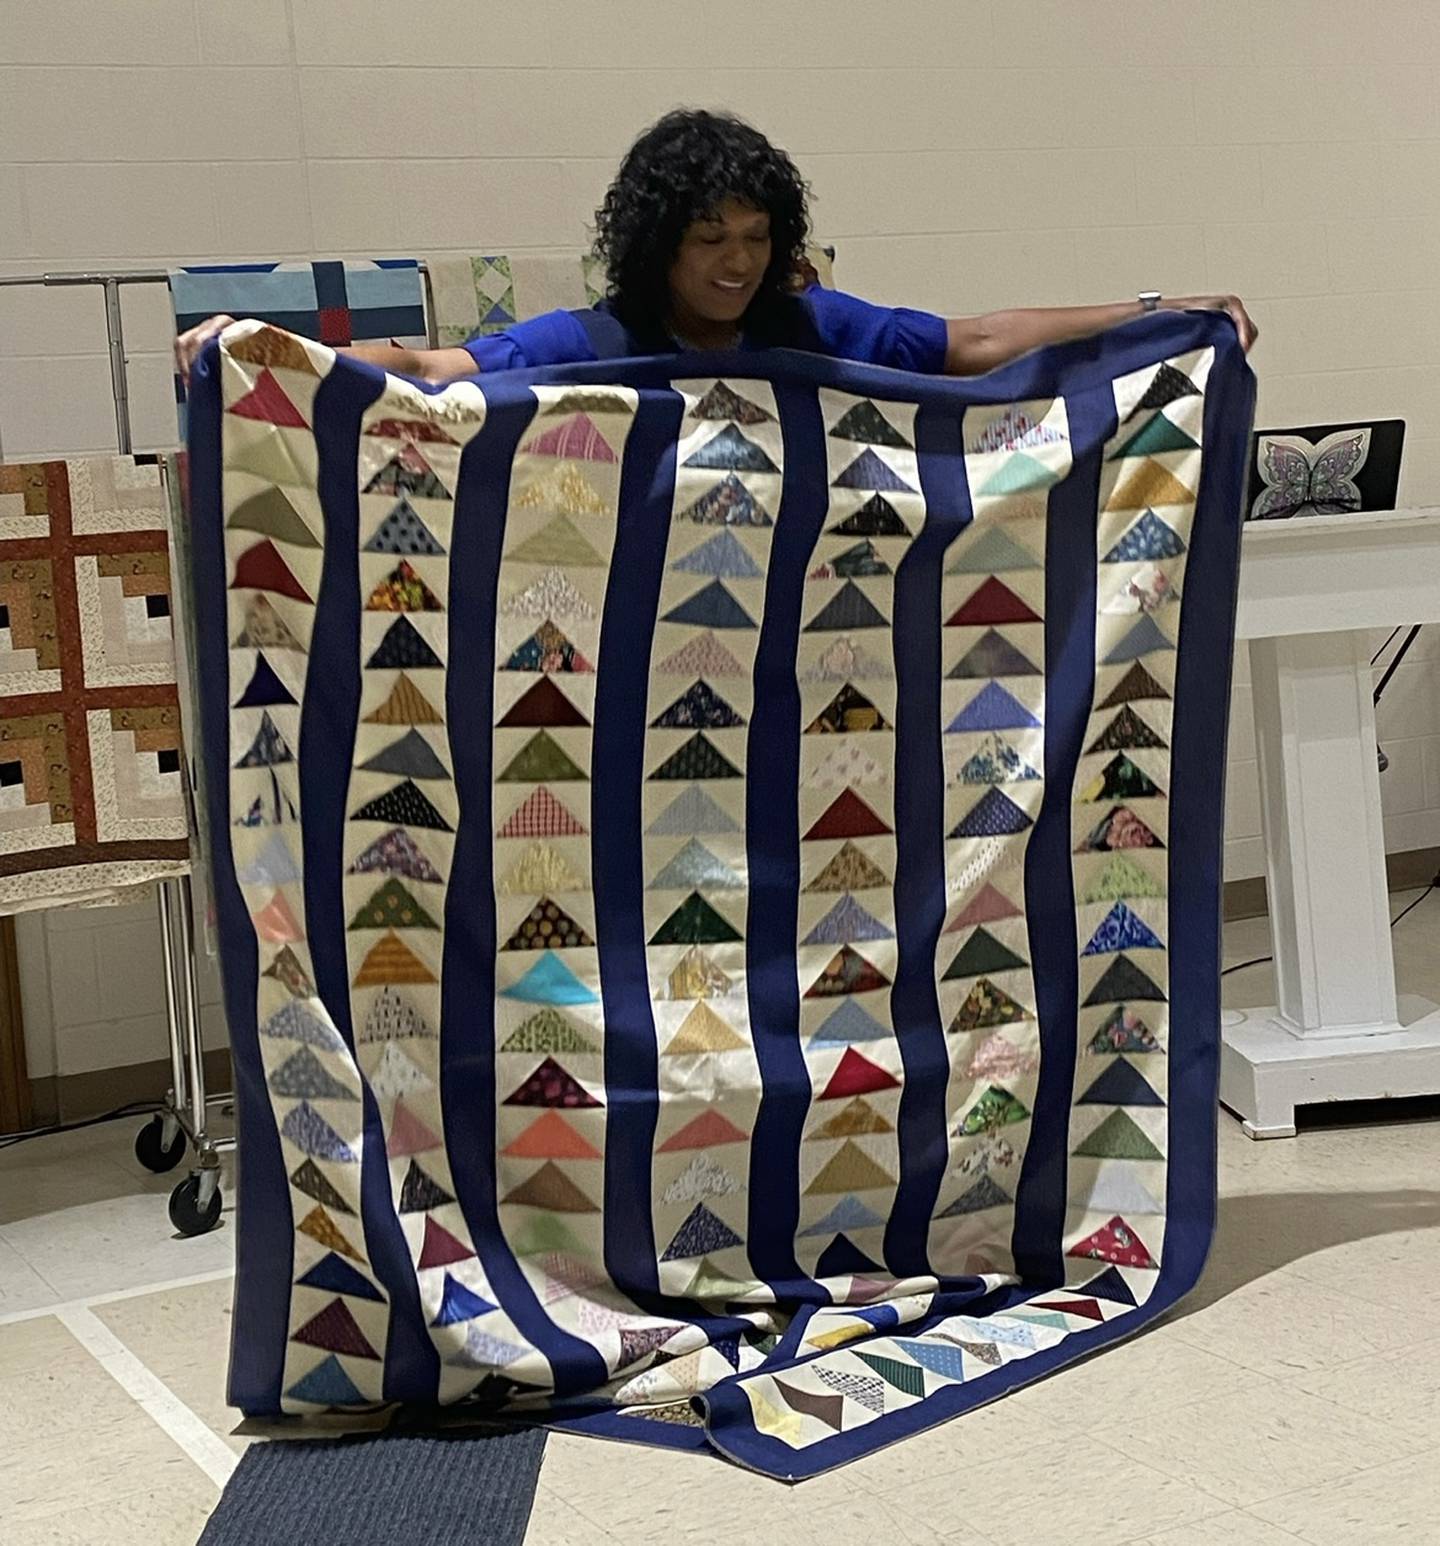 Connie Martin, Illinois Humanities Road Scholar and the sixth generation of a slave, will be presenting “Pre-Civil War Quilts: Secret Codes to Freedom on the Underground Railroad” at 7 p.m. Tuesday, June 25, at the Streator Public Library.